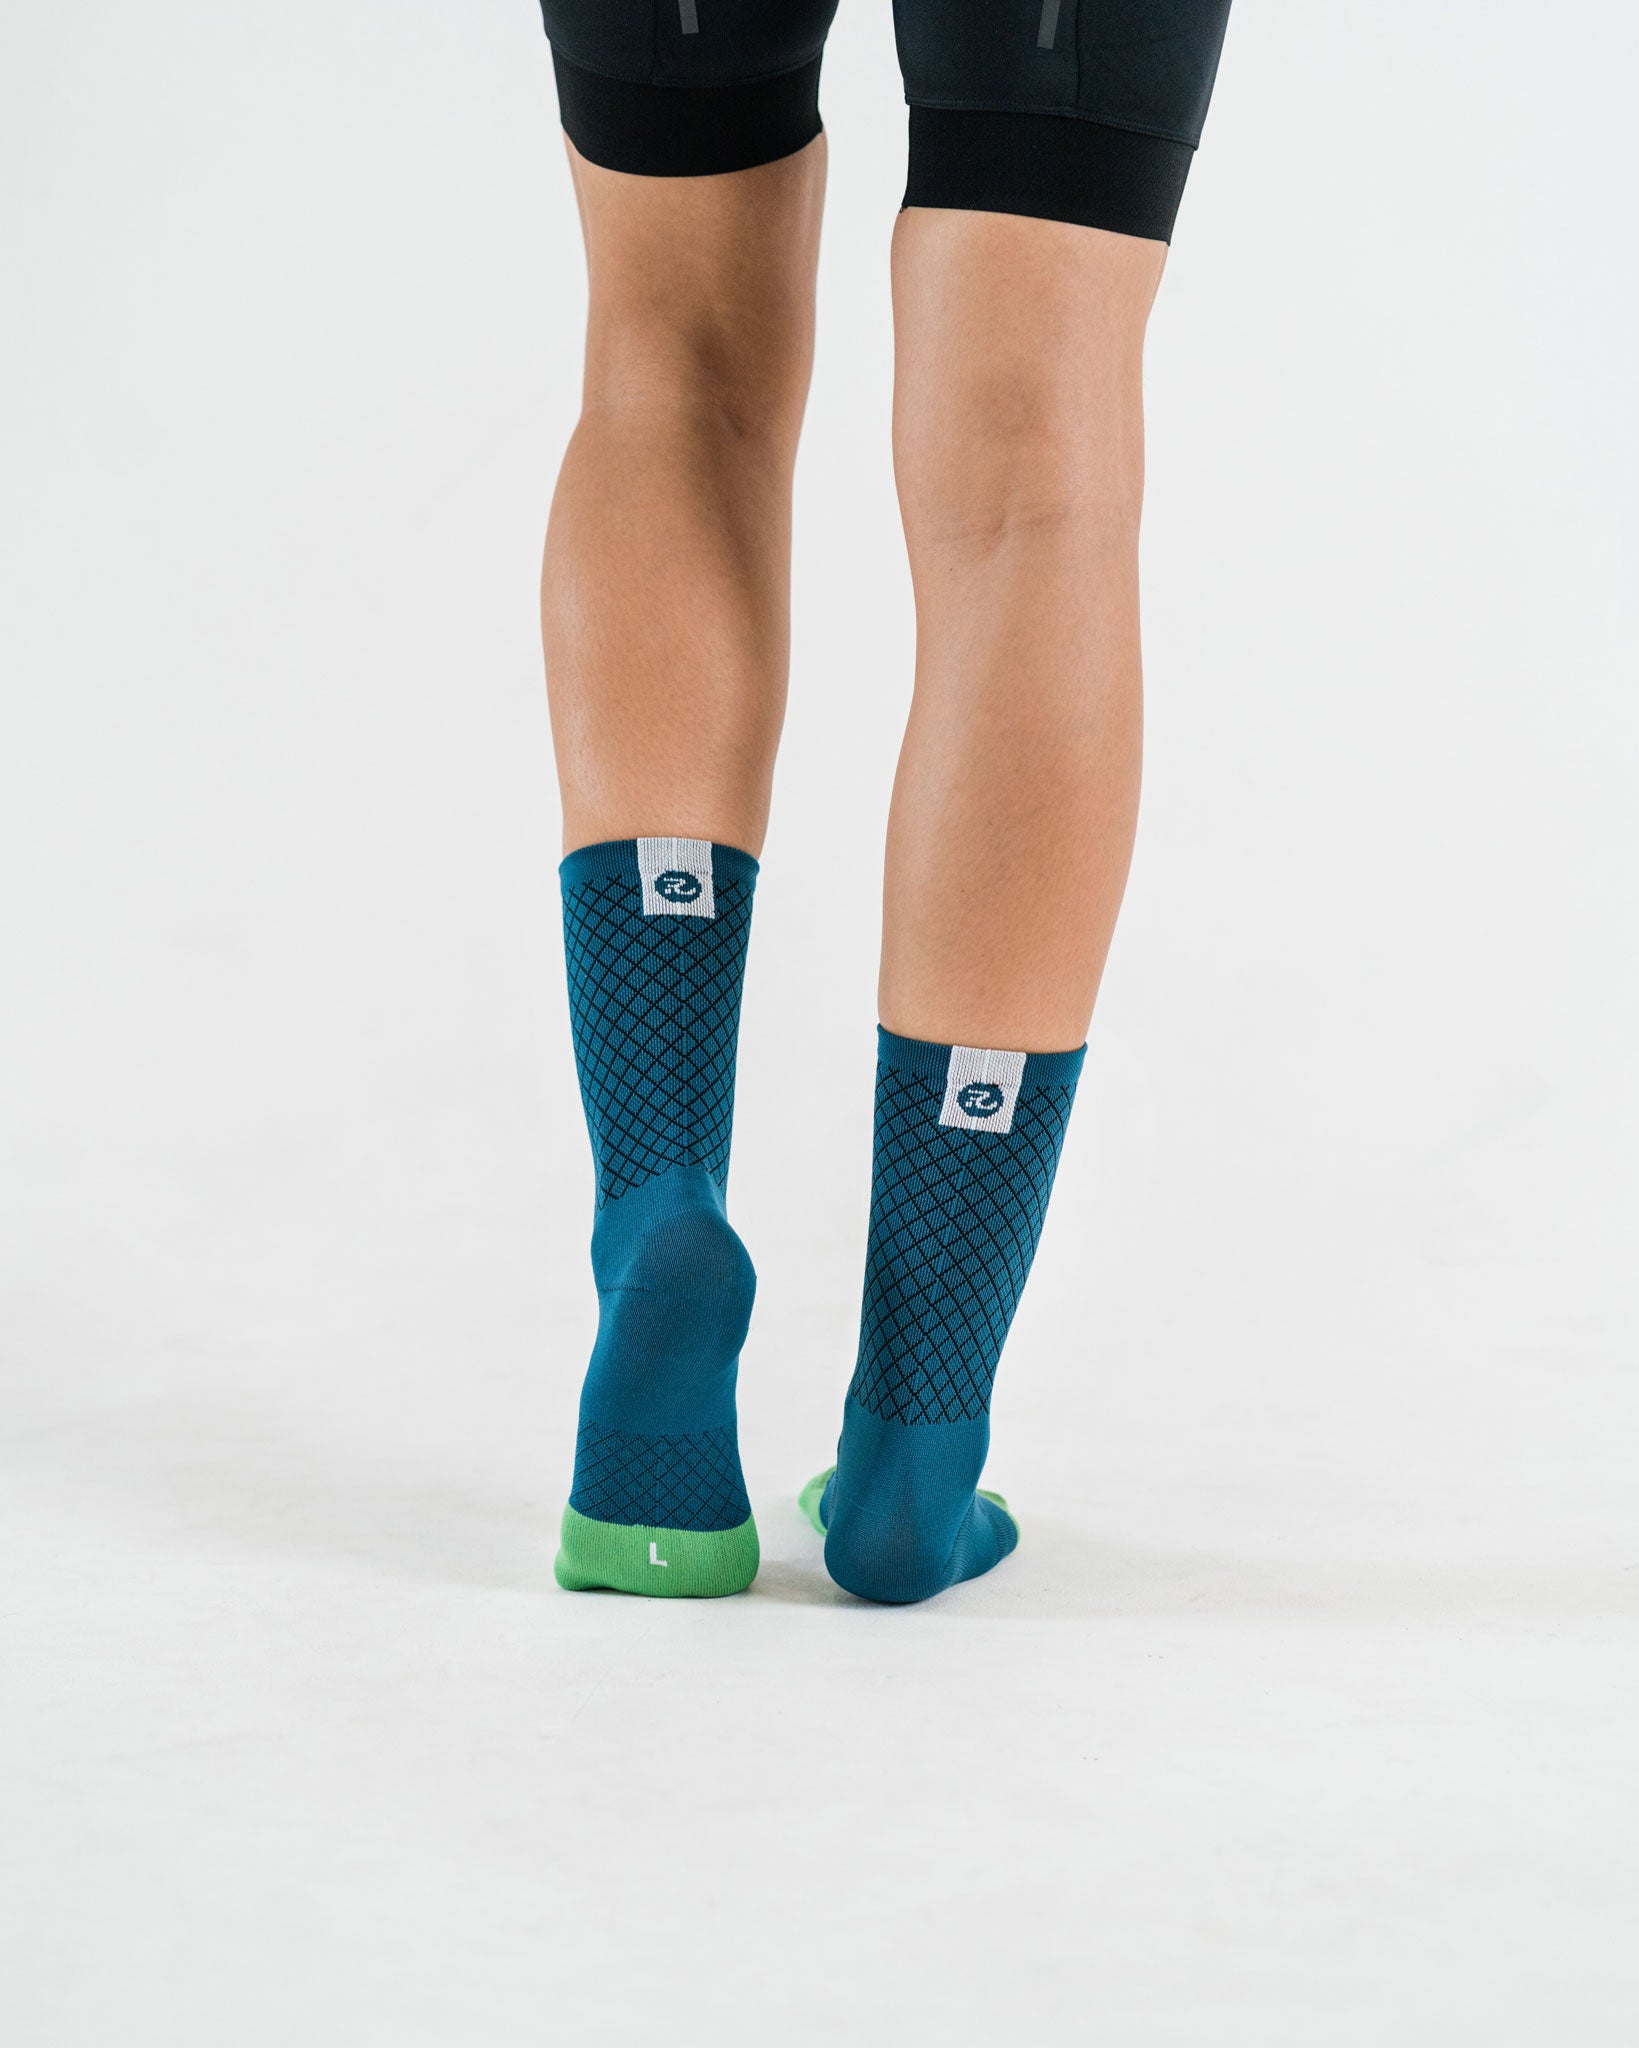 back view of blue cycling socks with down the road details